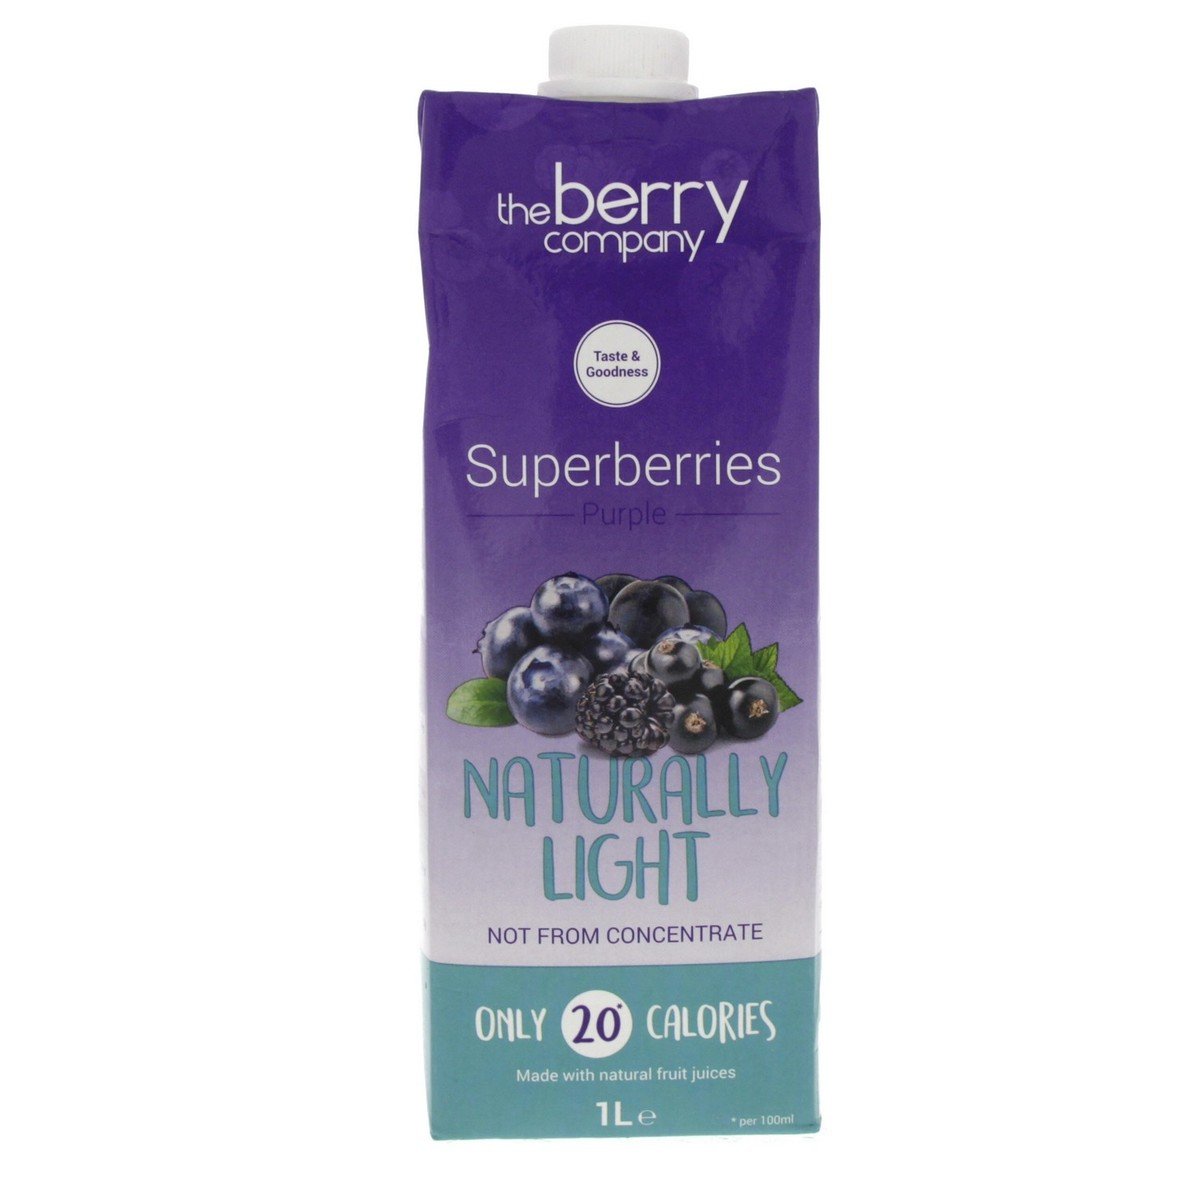 The Berry Company Superberries Purple Naturally Light 1 Litre